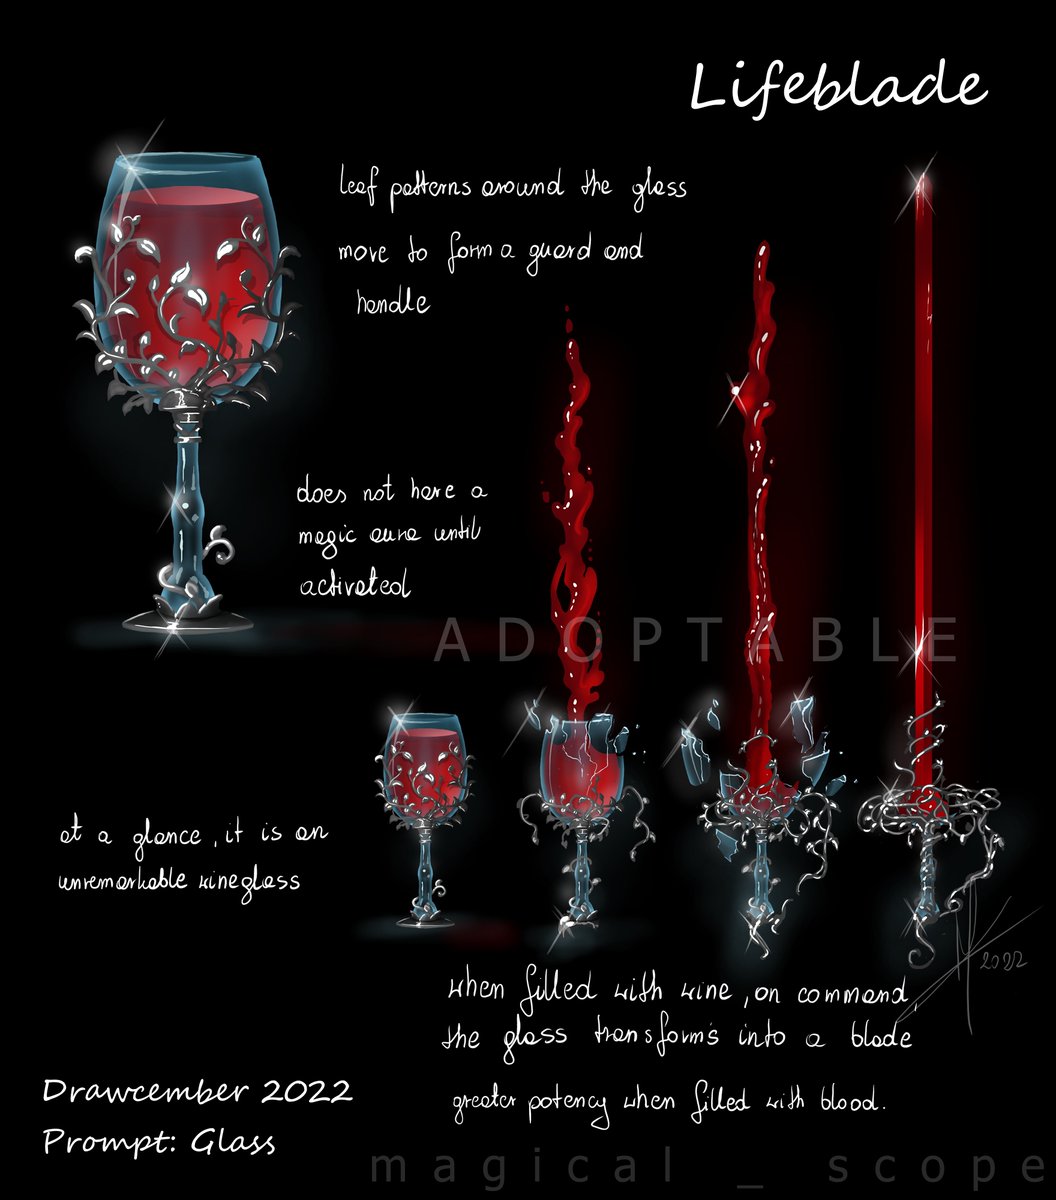 This syringe weapon design hit pretty hard outta nowhere, and the wineglass almost rivals it too.